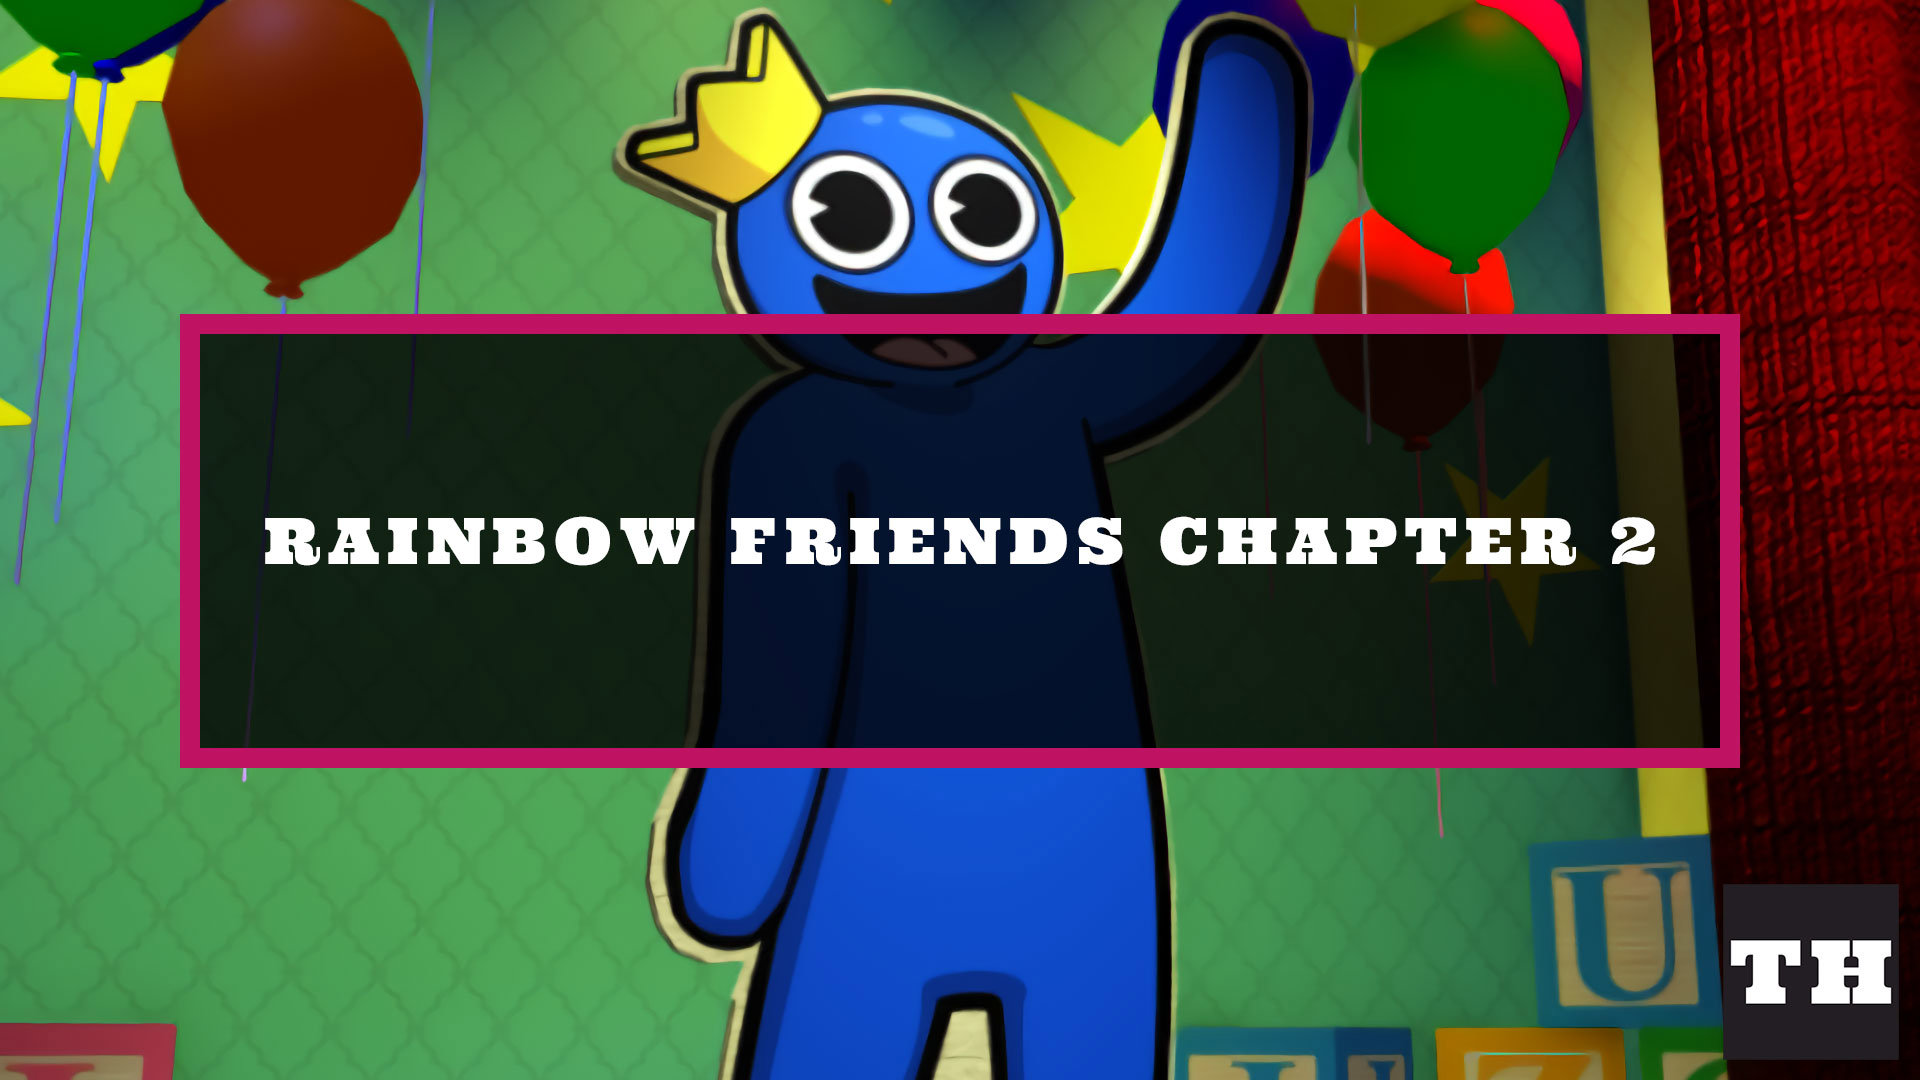 Rainbow Friends Chapter 2 Date, Leaks, & More!